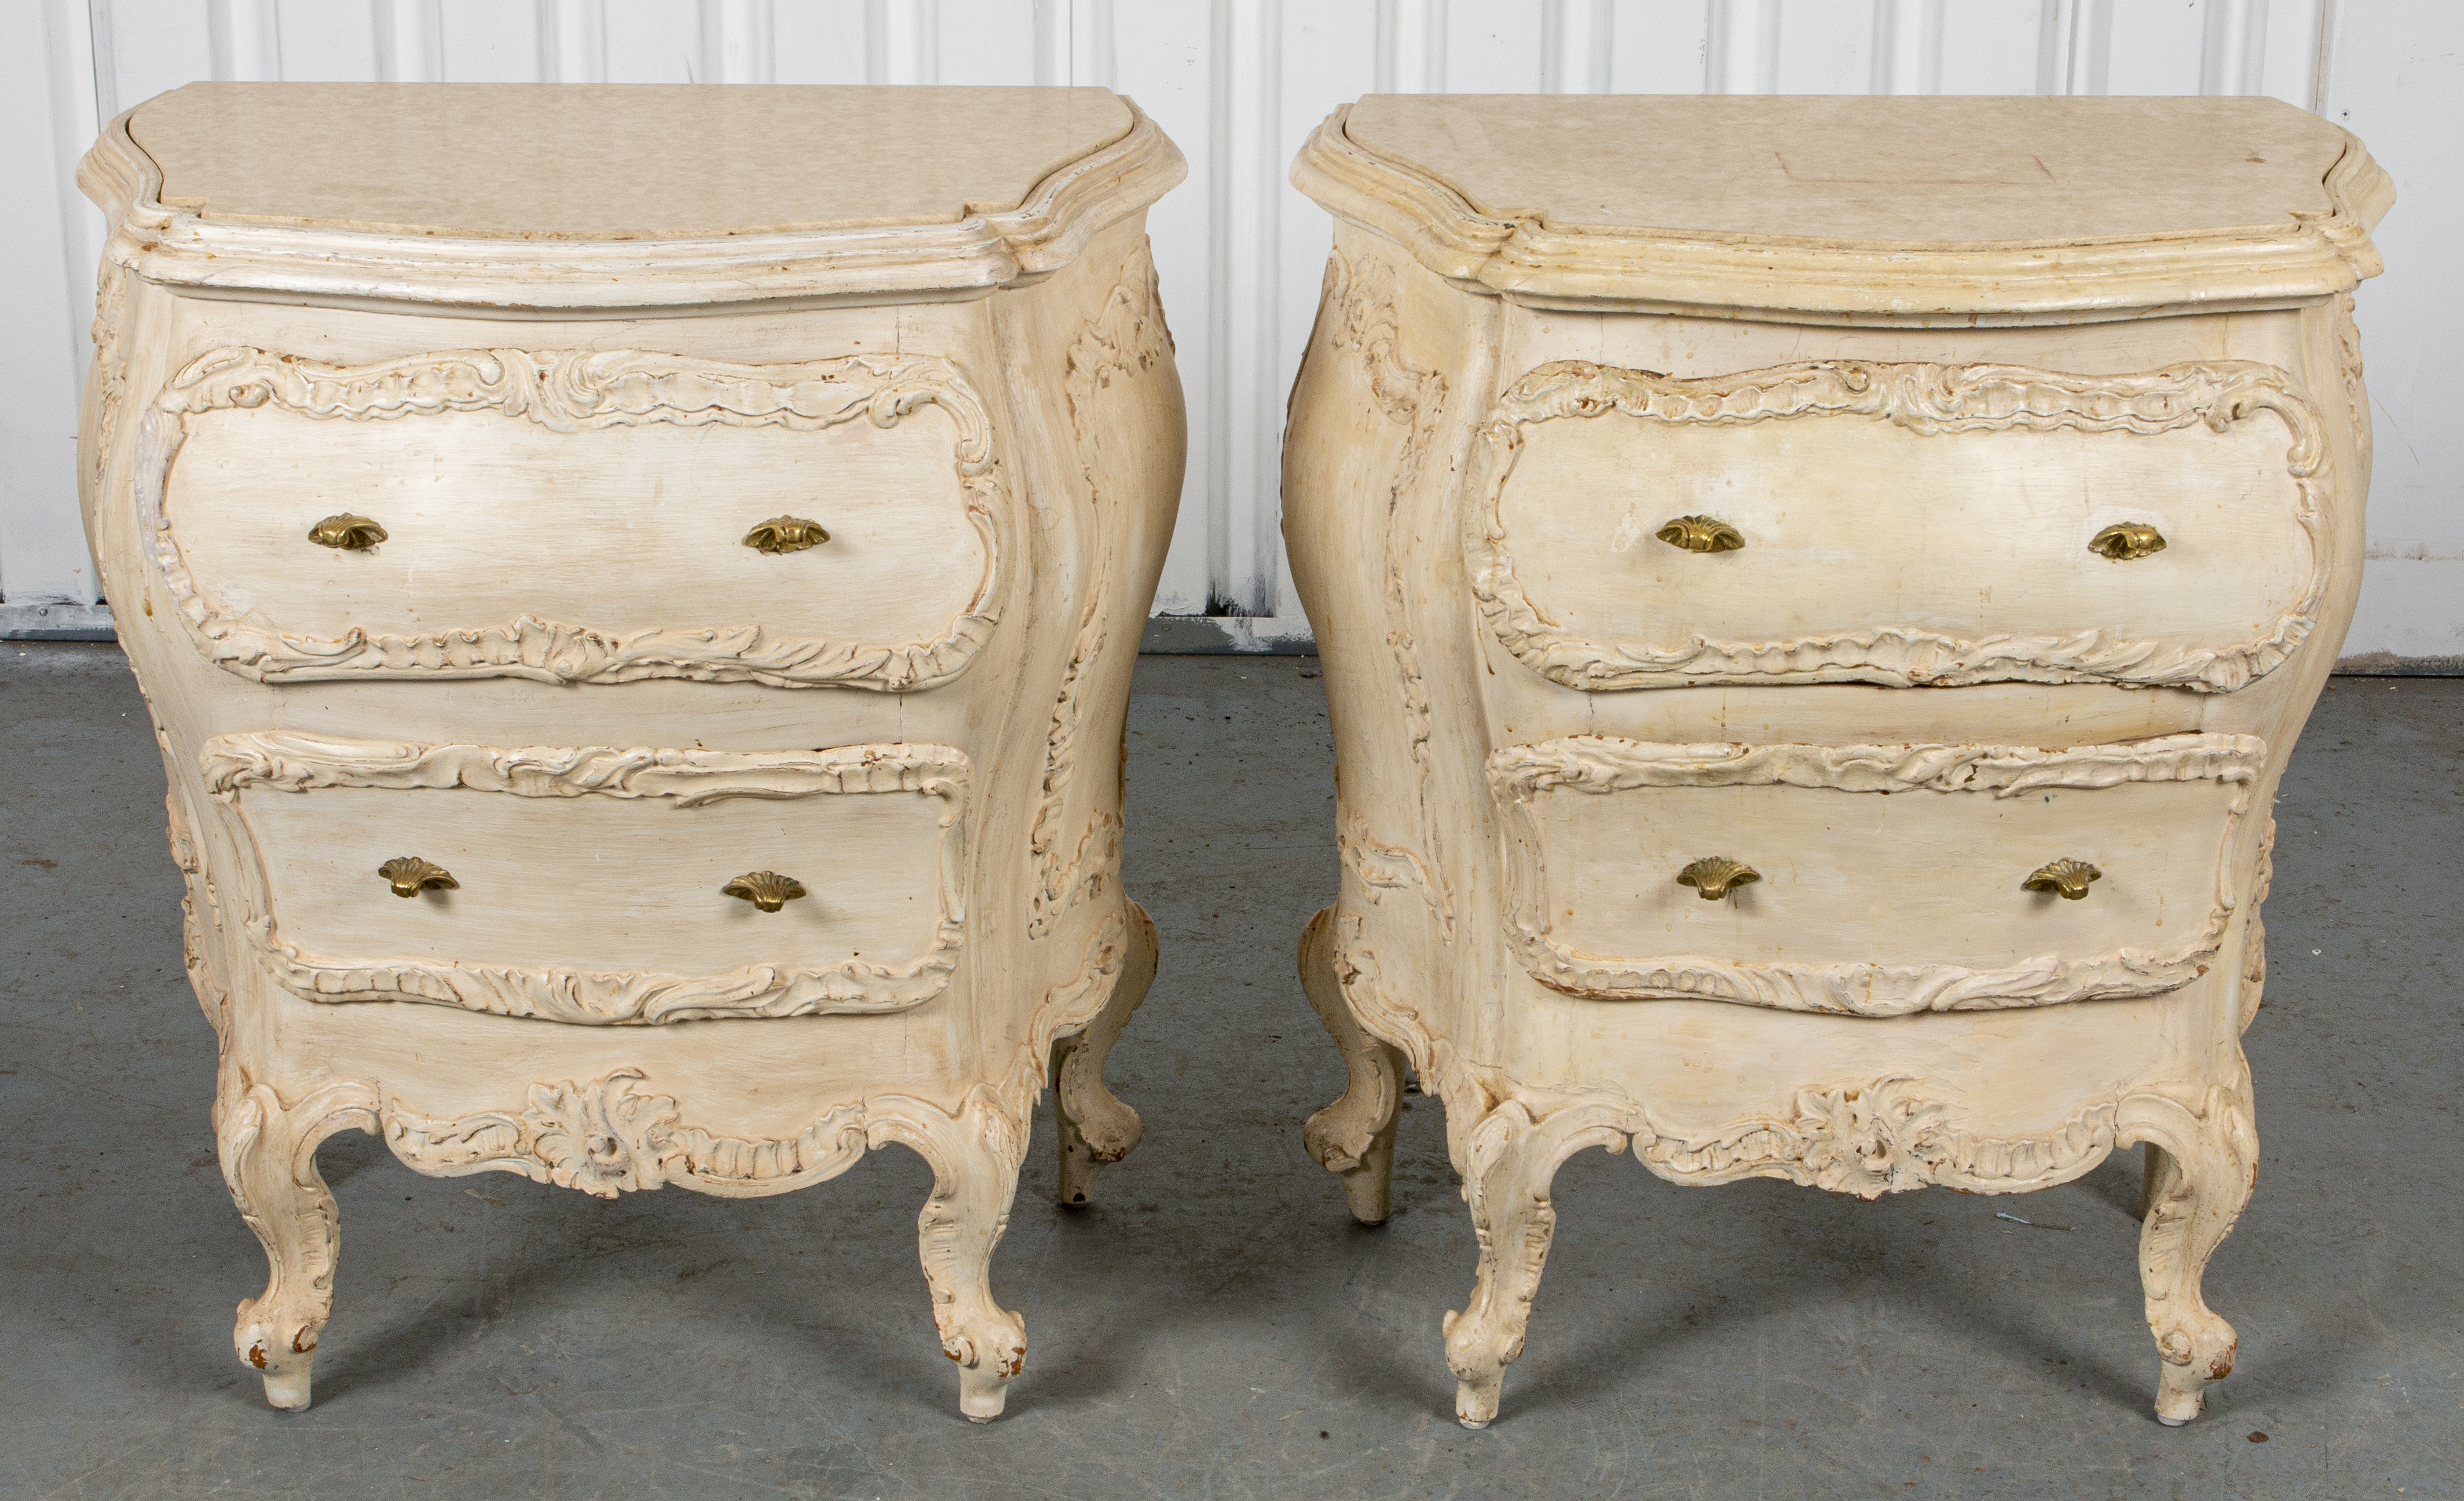 VENETIAN ROCOCO STYLE PAINT DECORATED